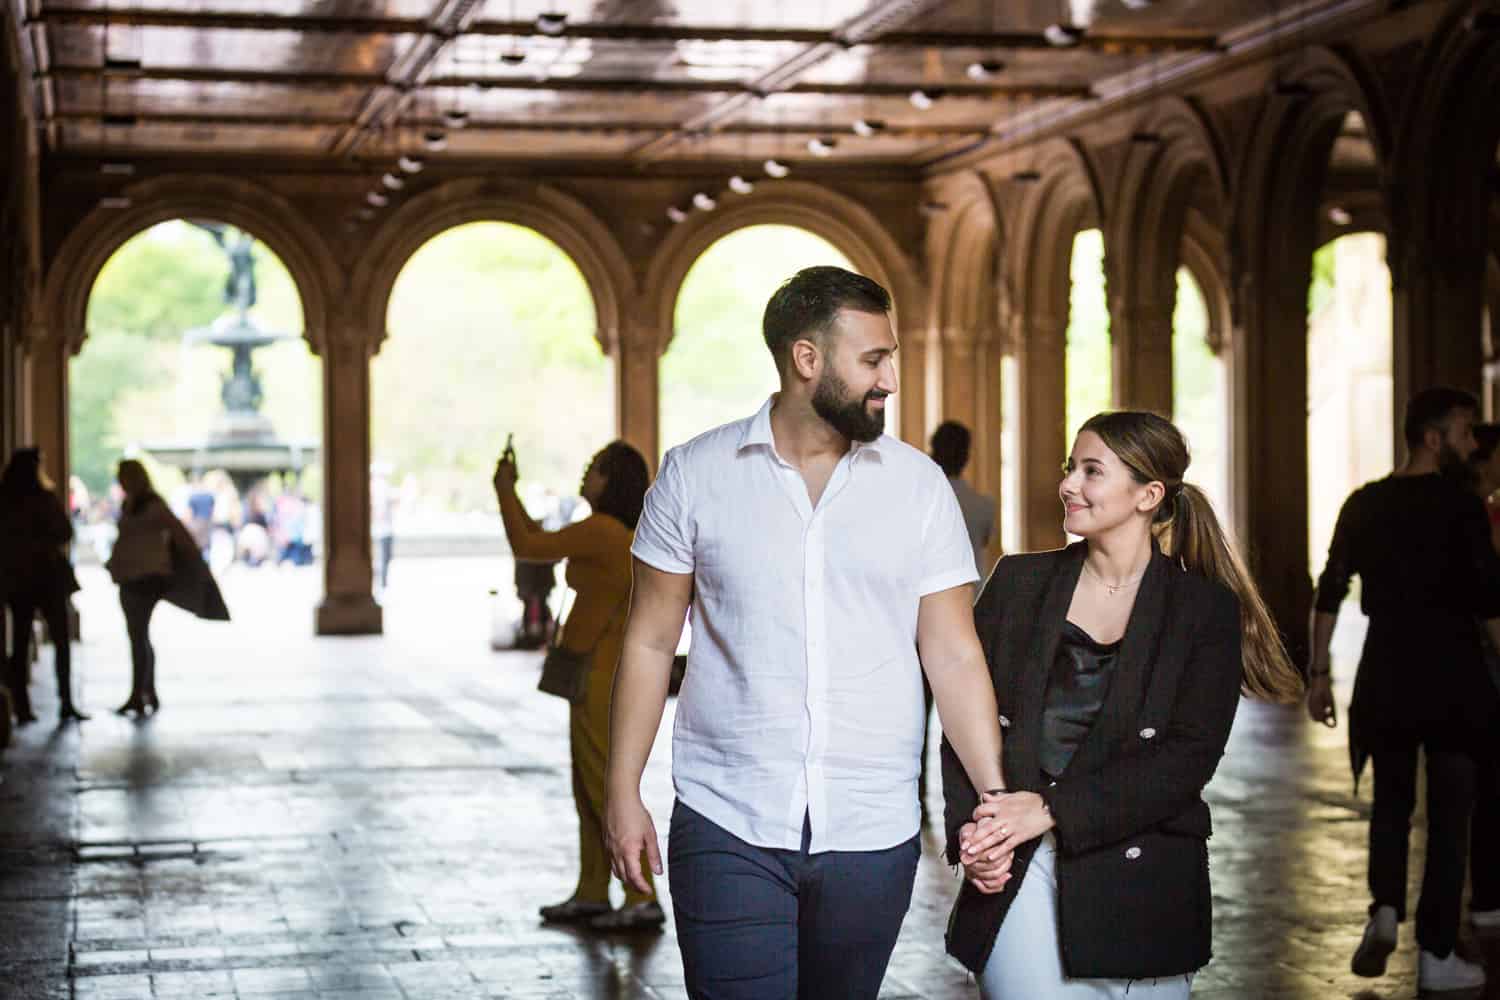 Couple walking hand-in-hand through Bethesda Terrace in Central Park